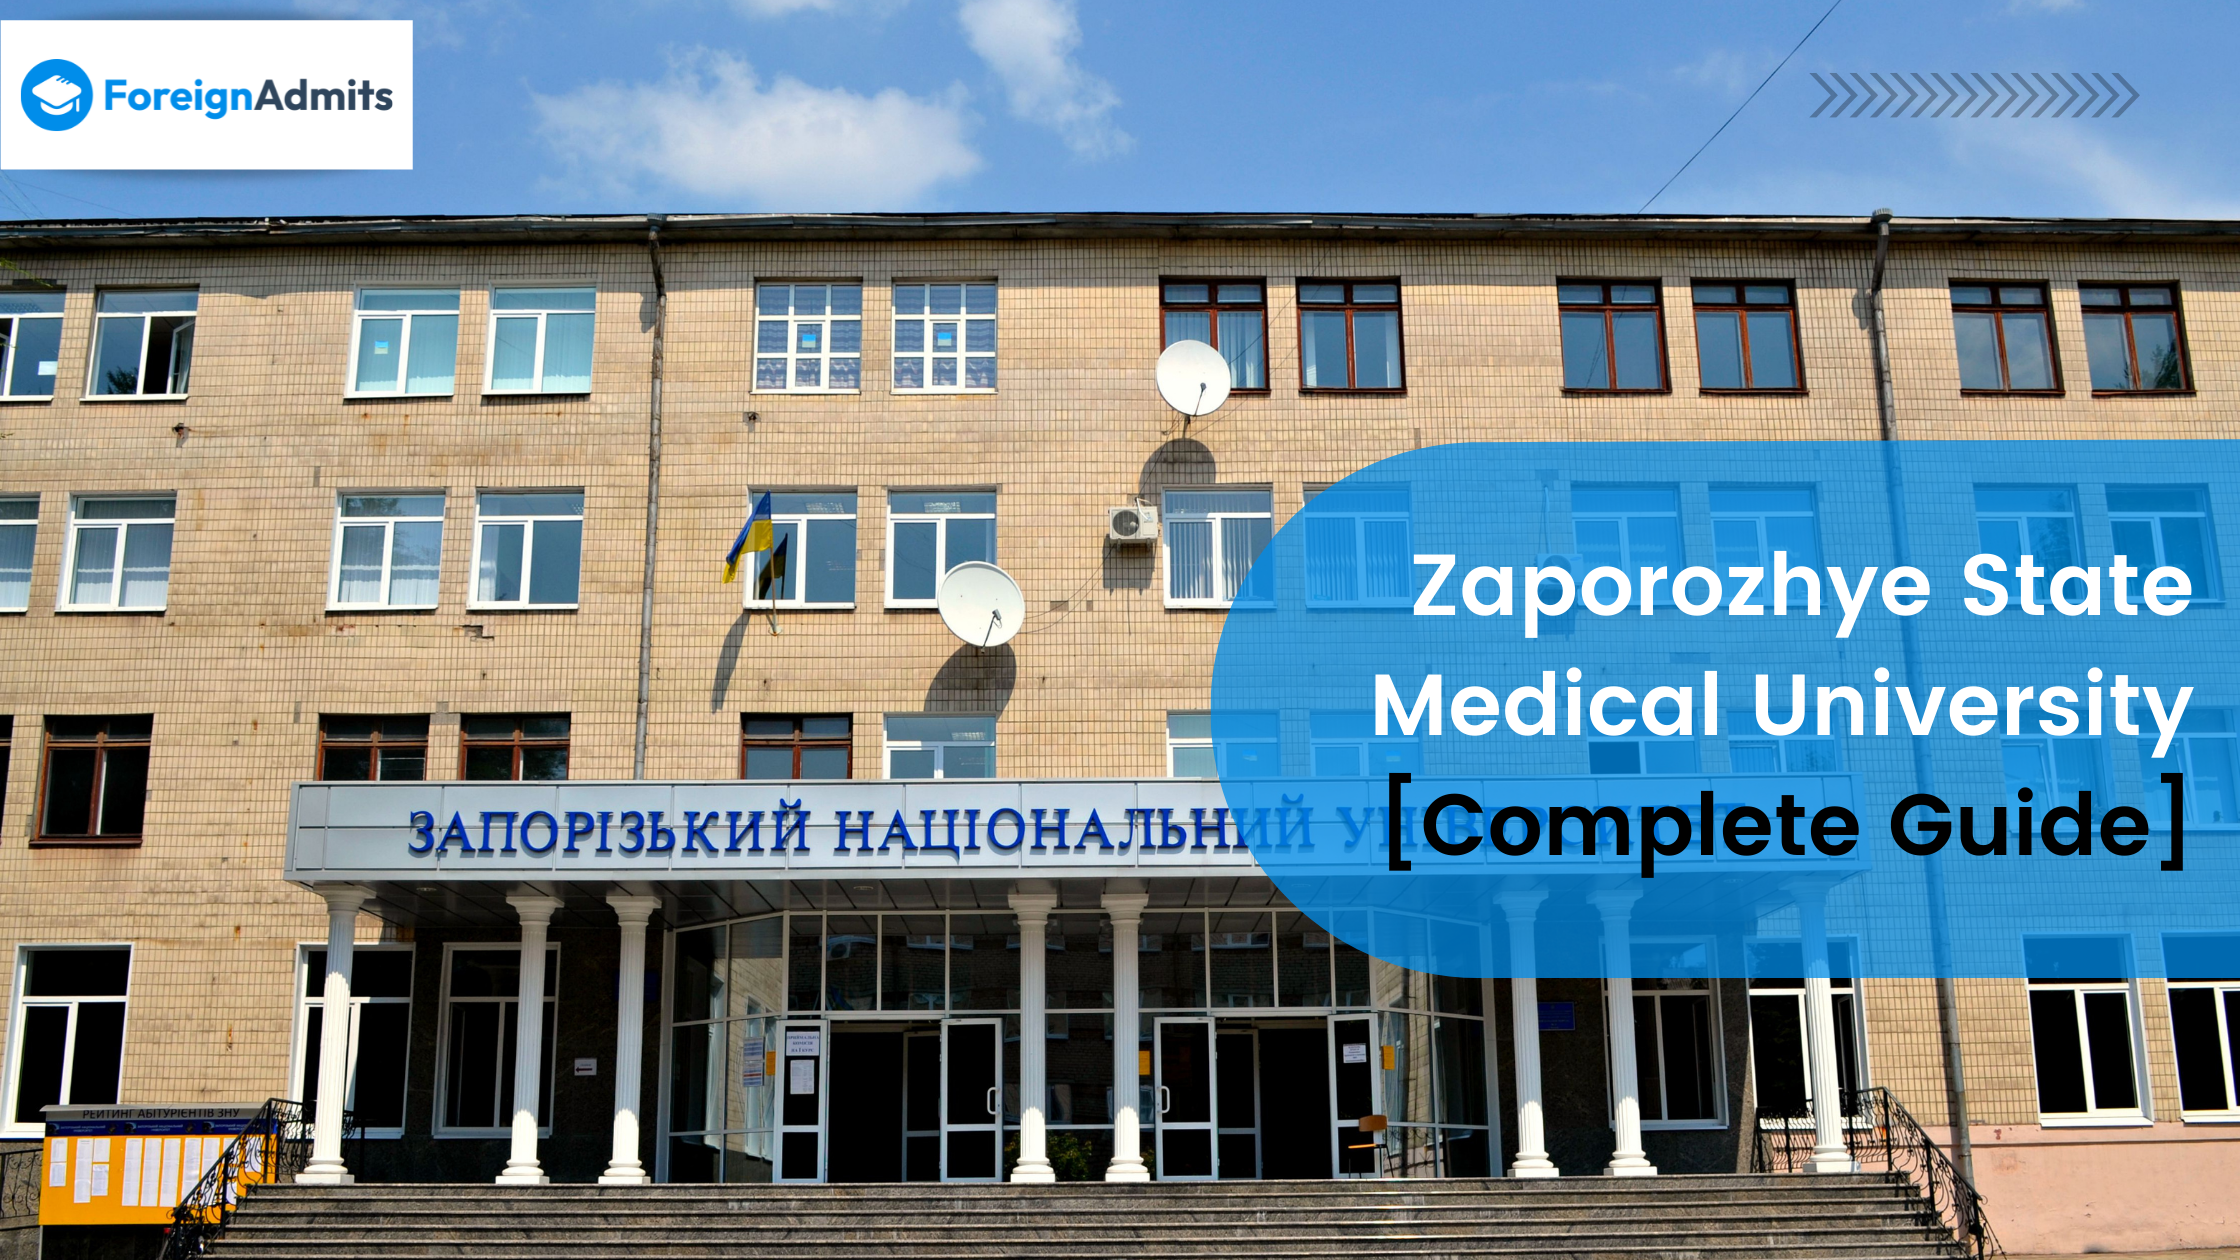 Zaporozhye State Medical University [Complete Guide]